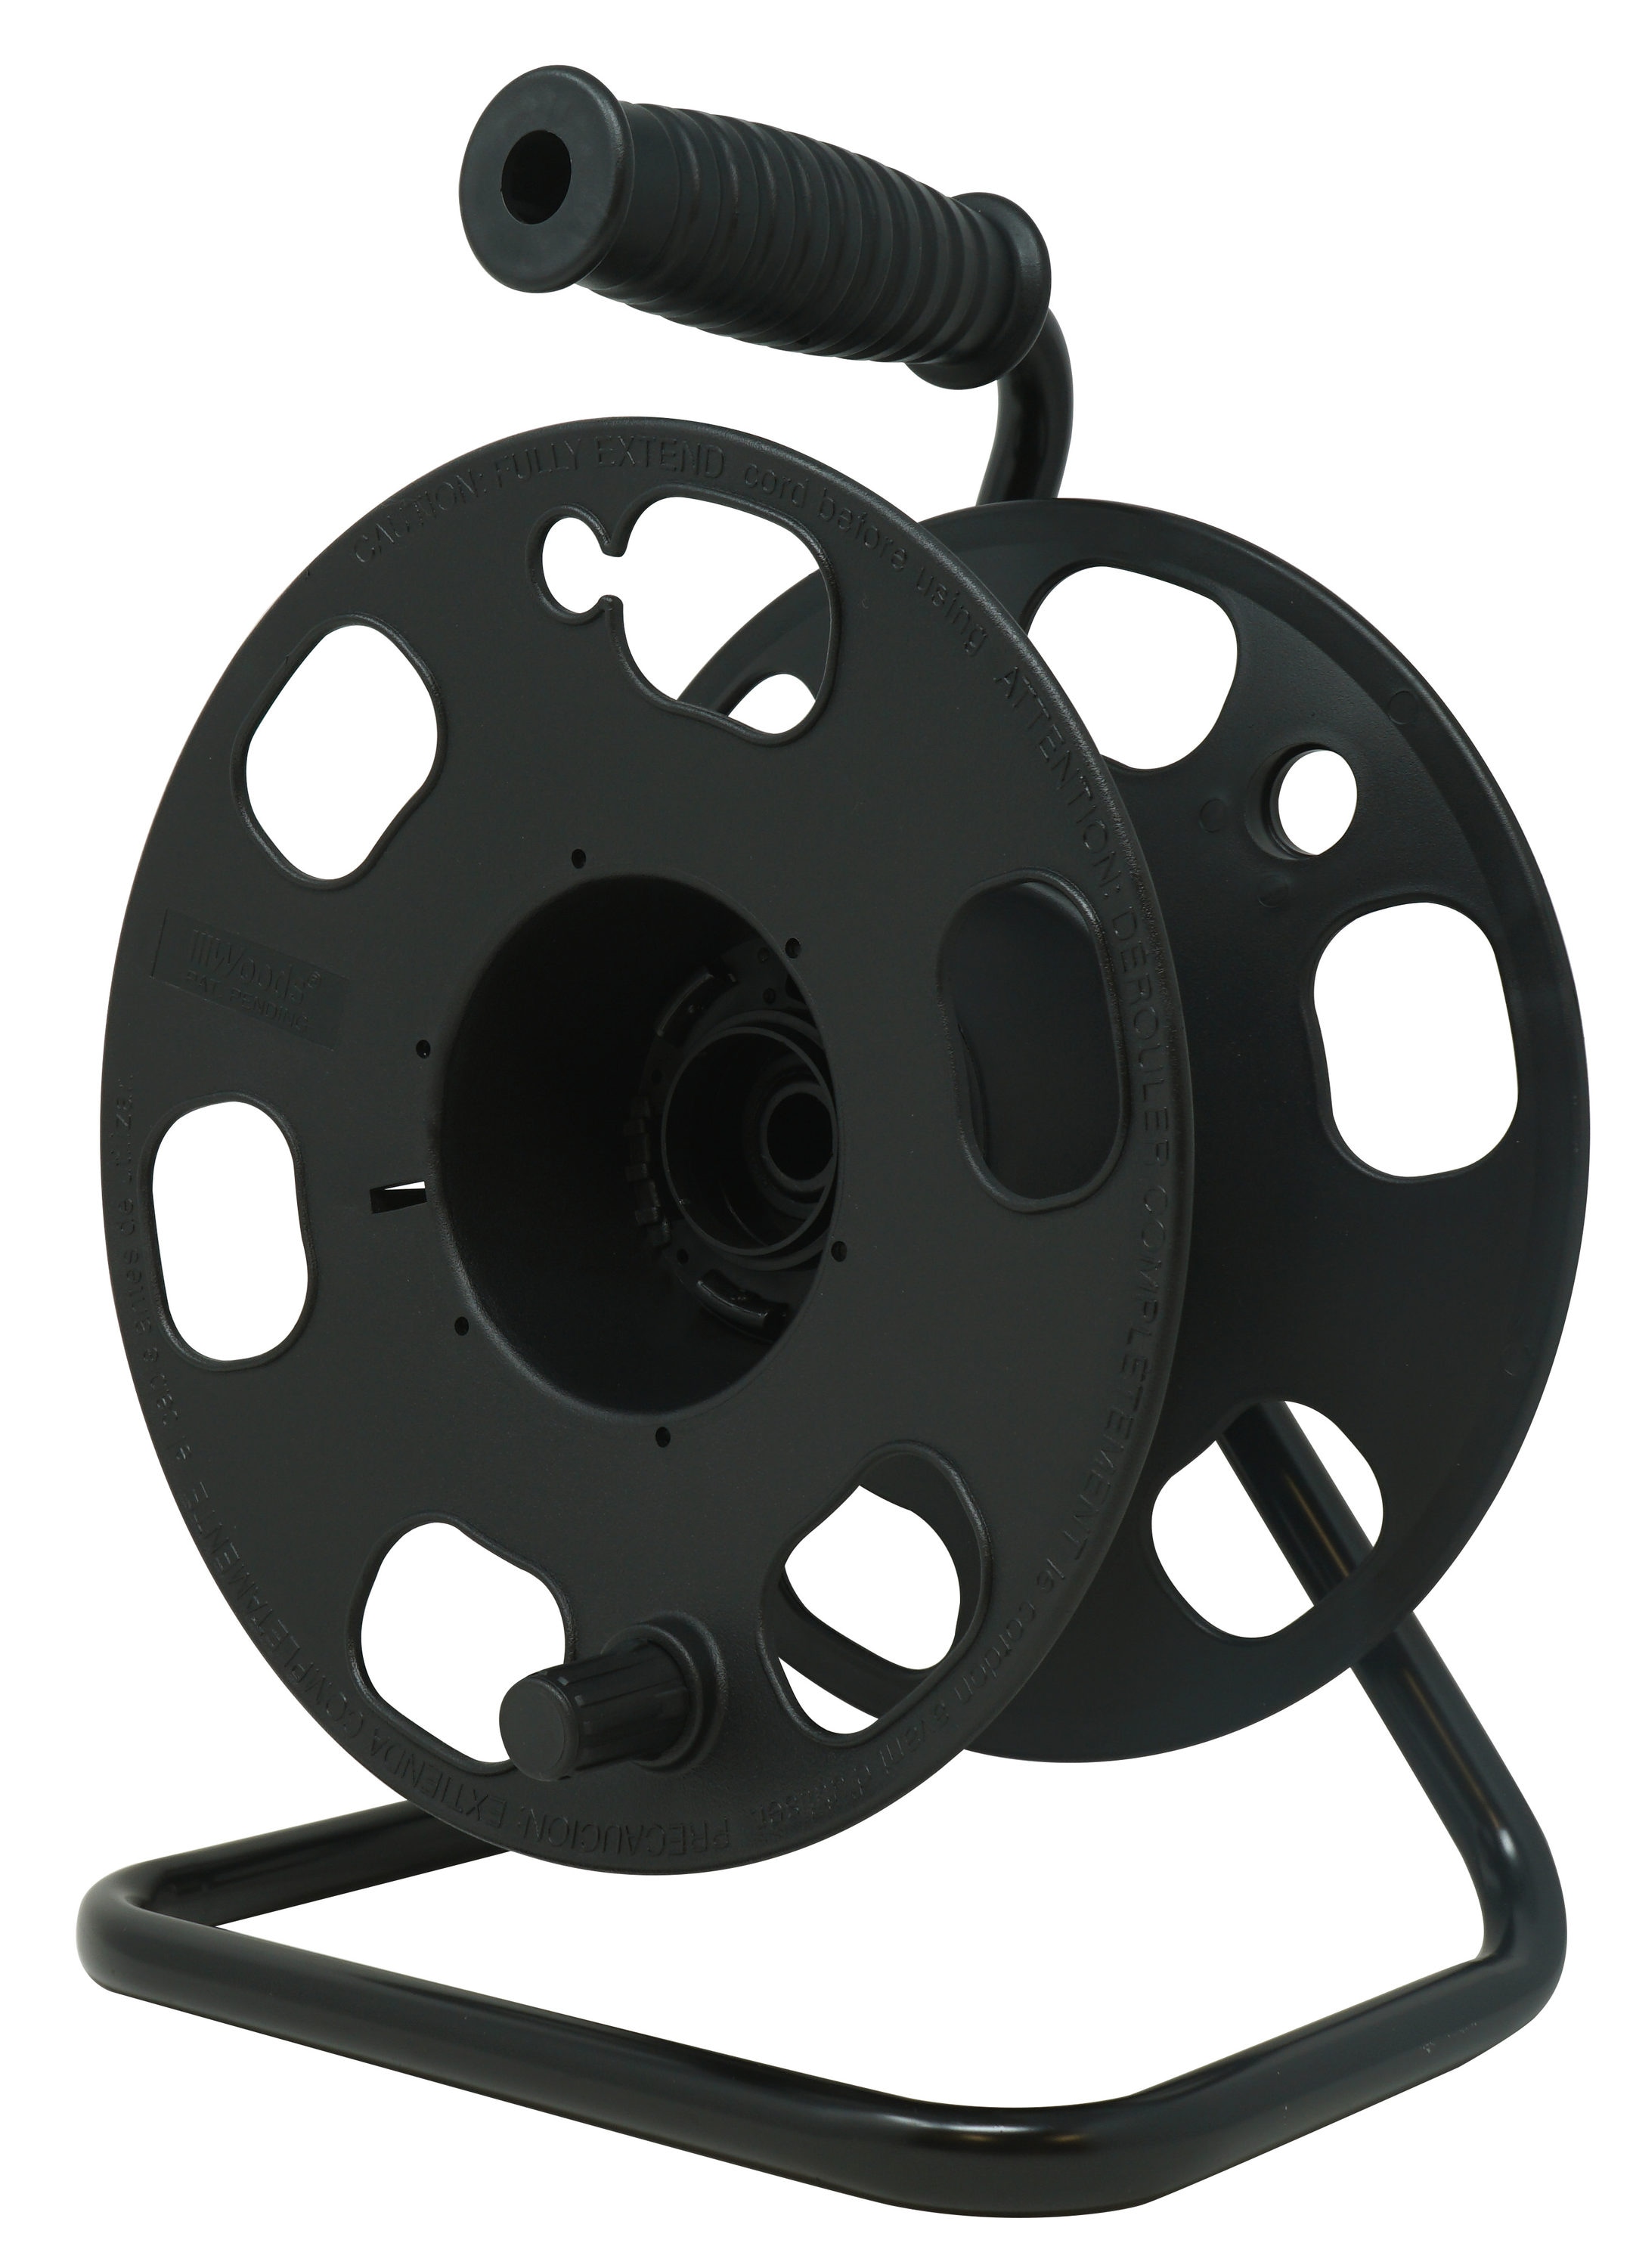 Woods 22849 Metal Extension Cord Reel Stand In Black, Heavy Duty, Quick  Snap Together Design, S